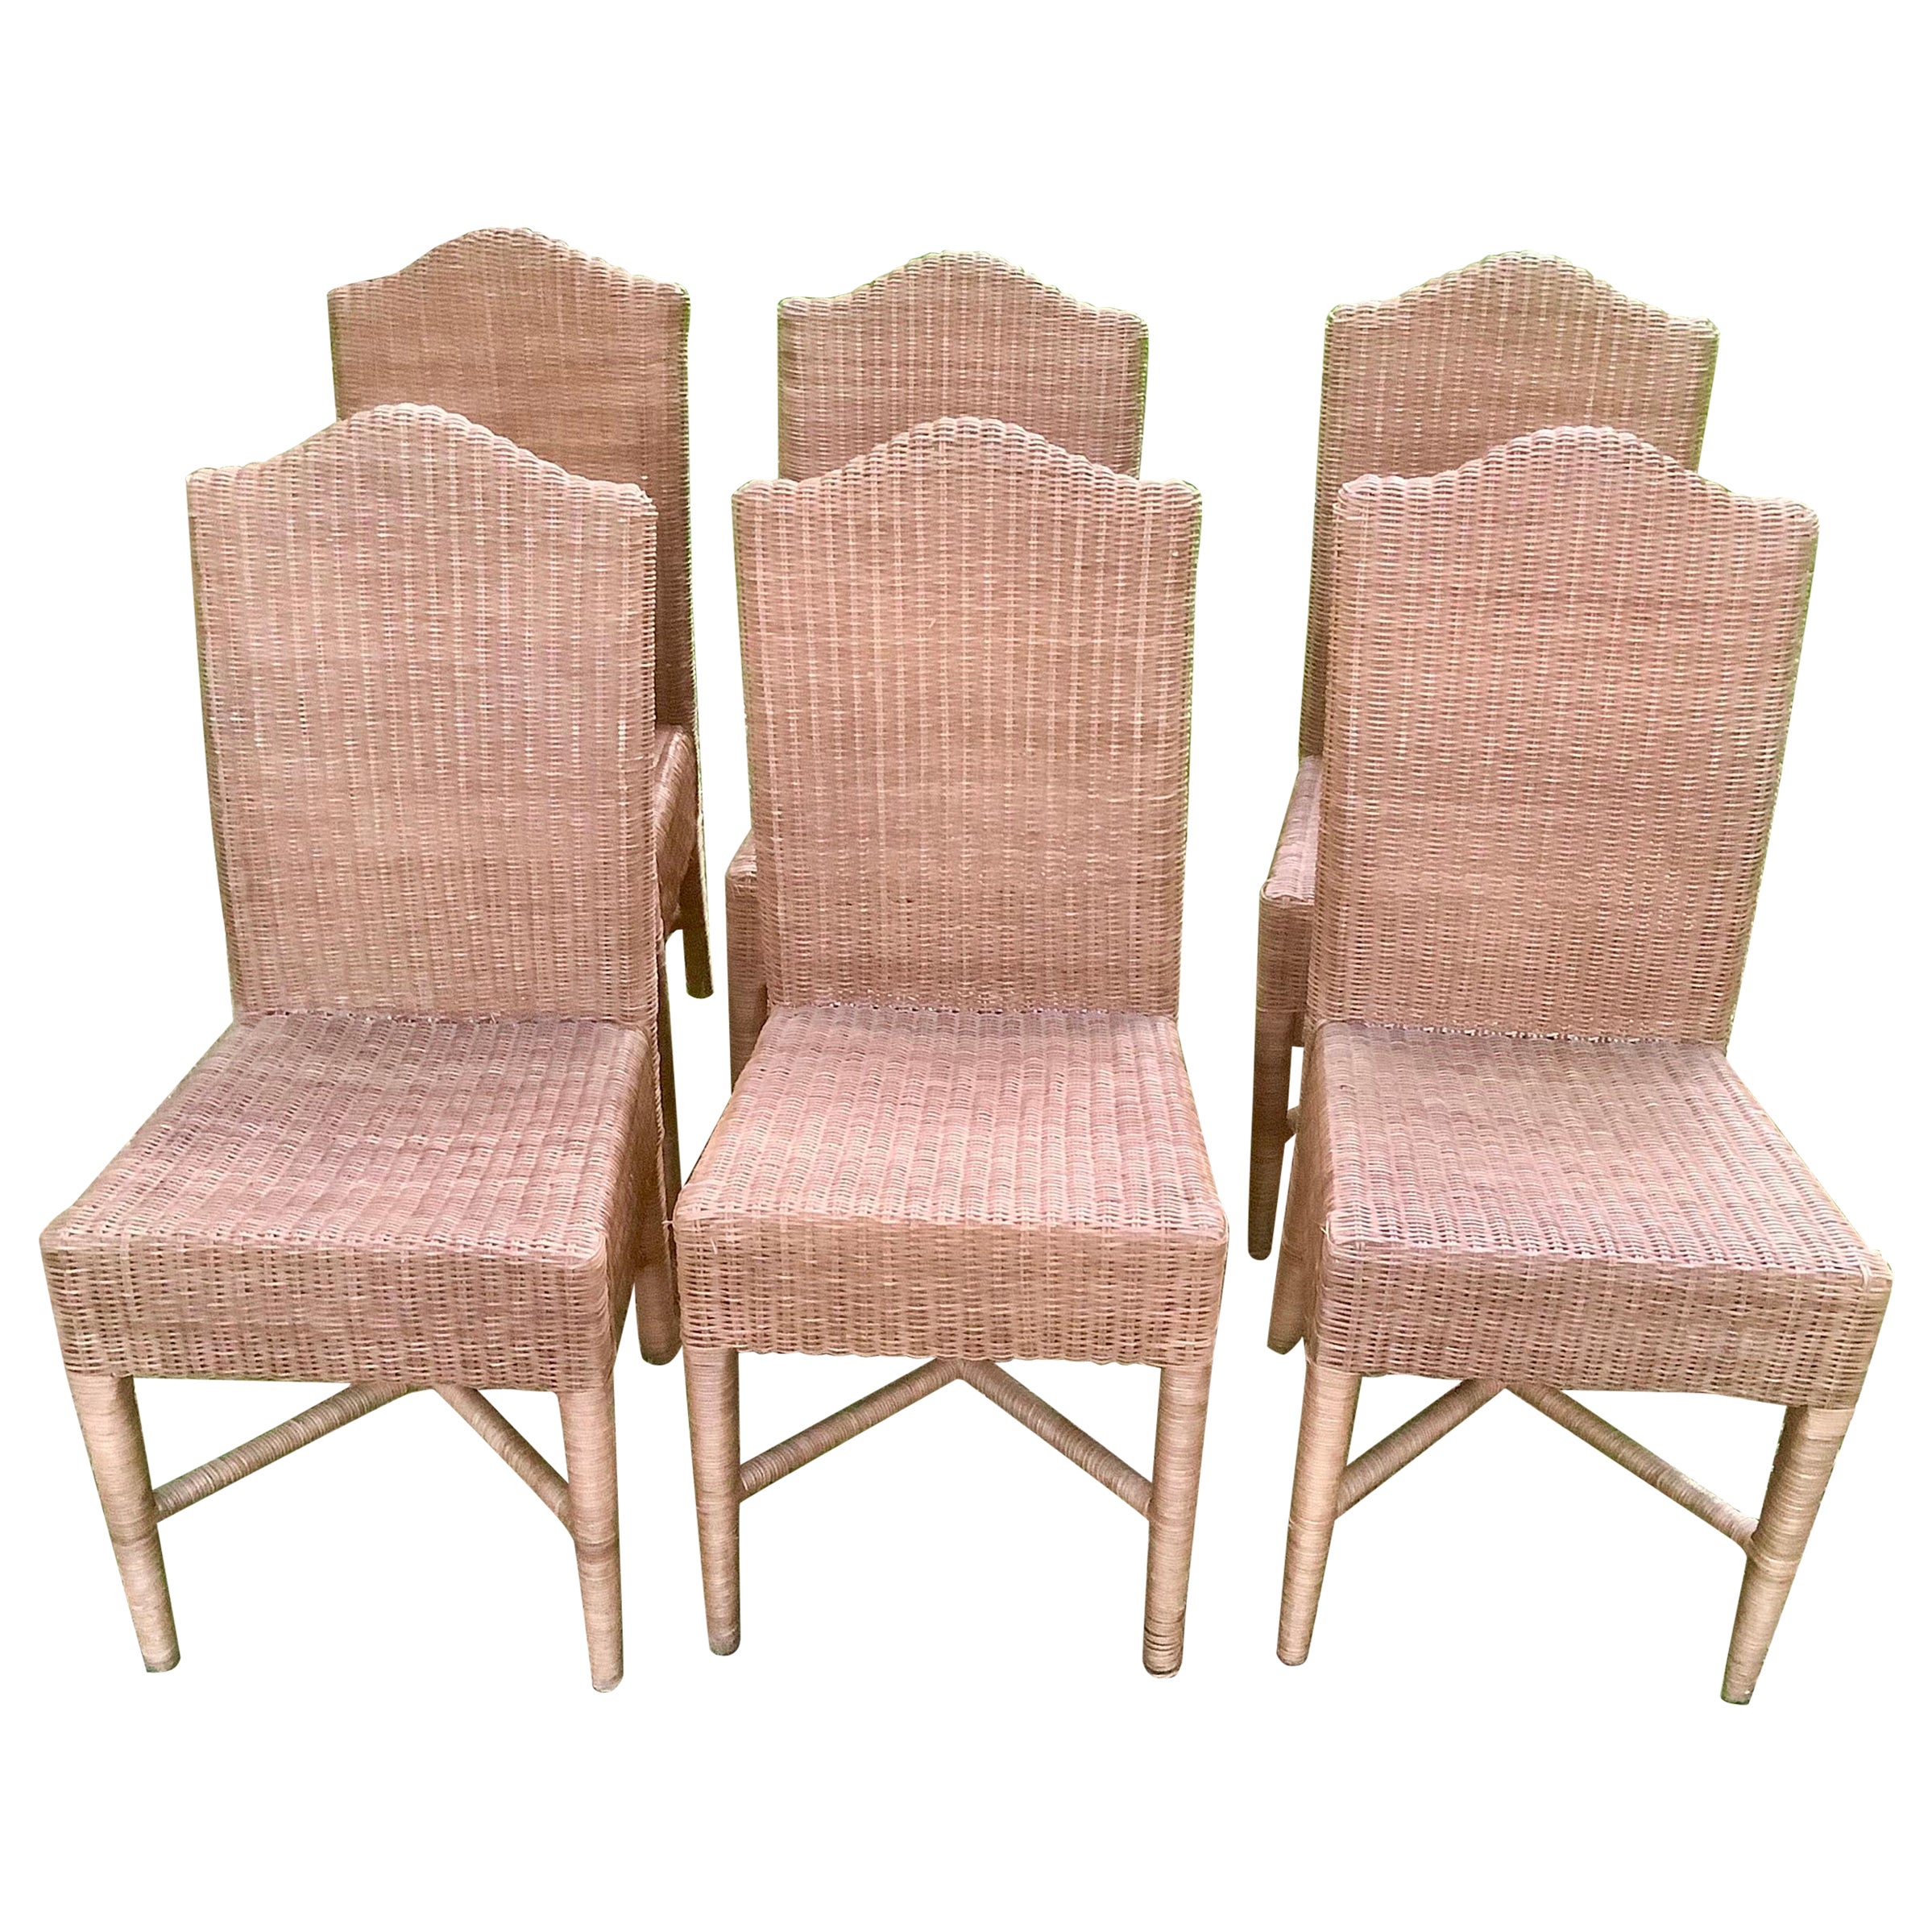 Set of Six Vintage Woven Wicker Dining Chairs